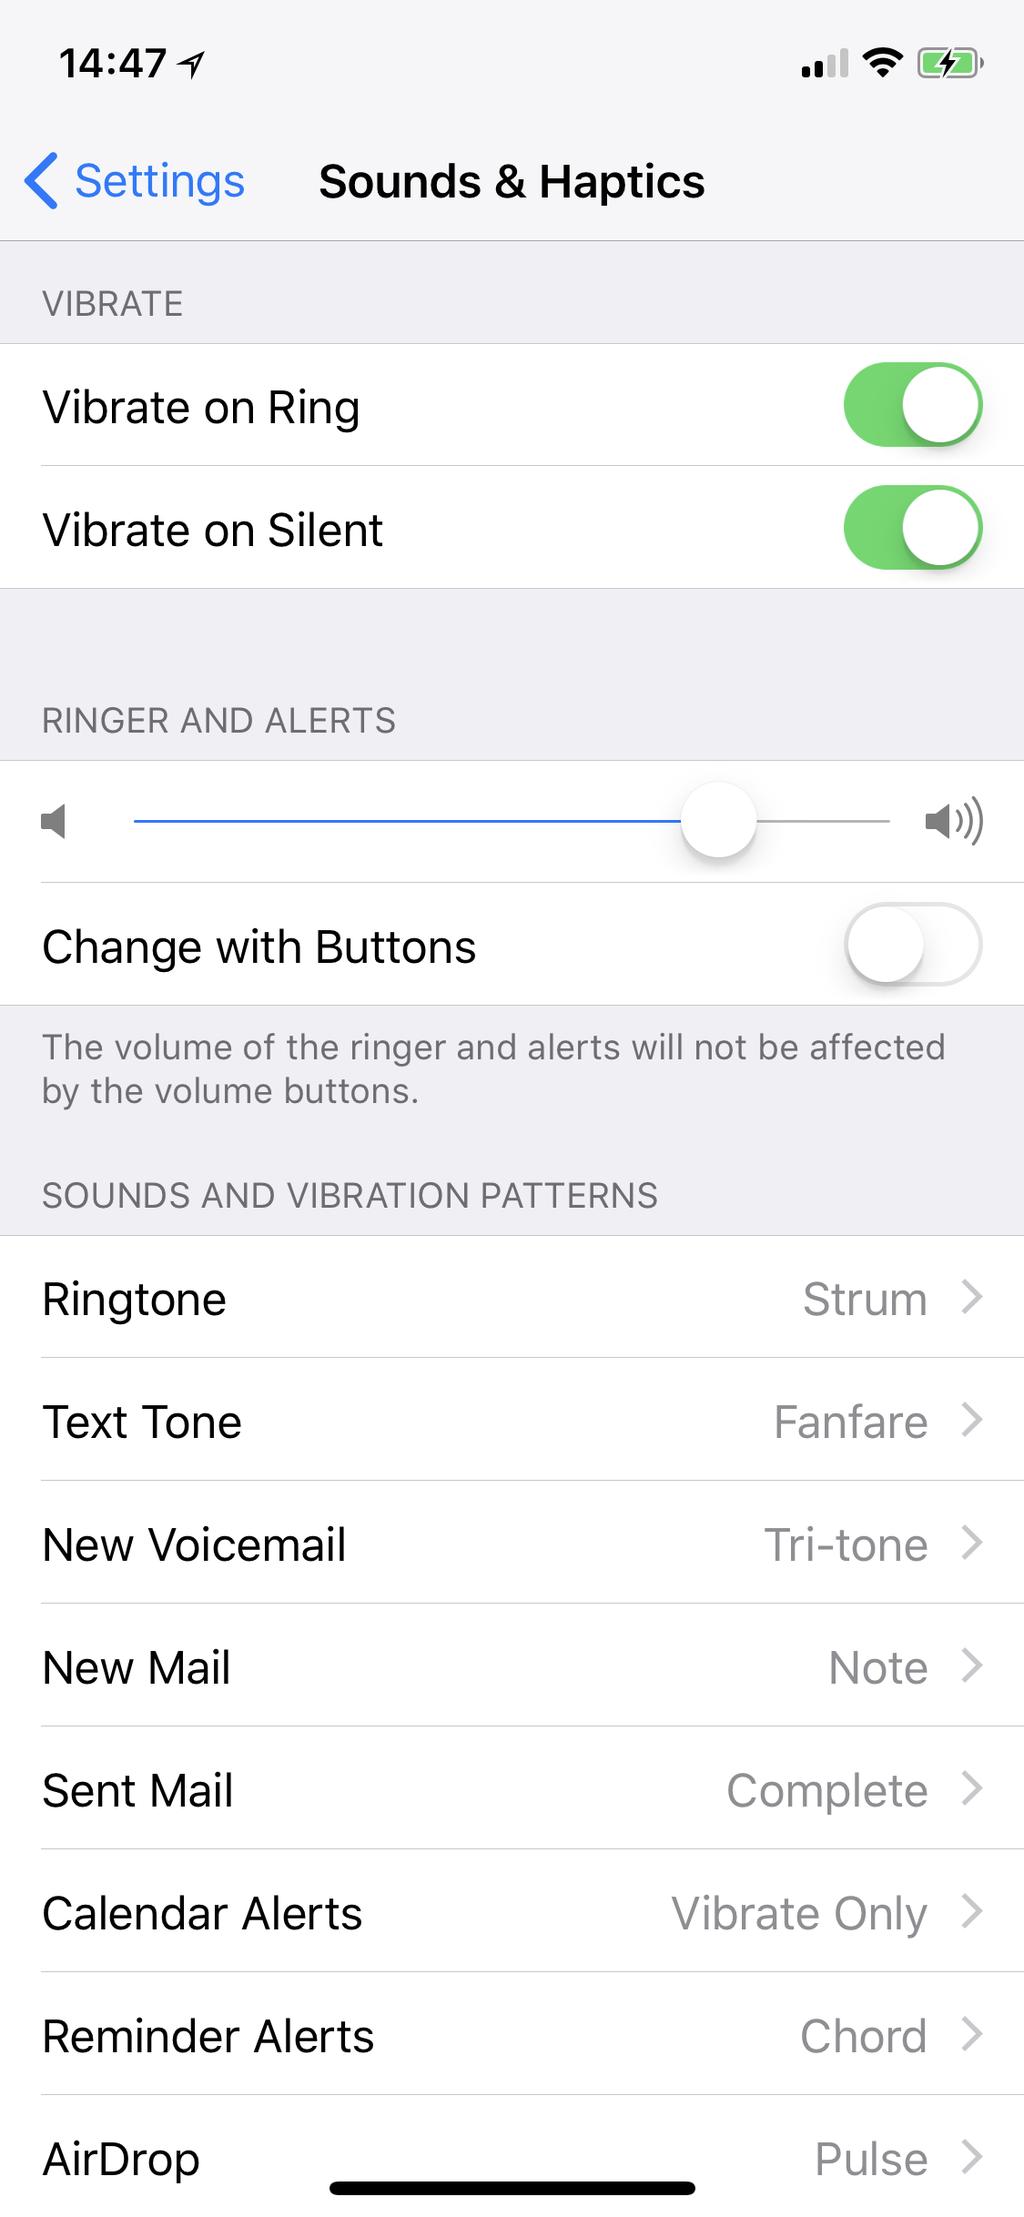 Sounds: To ensure that the the ios notifications are audible, verify that the RINGER AND ALERTS slider is set to full.